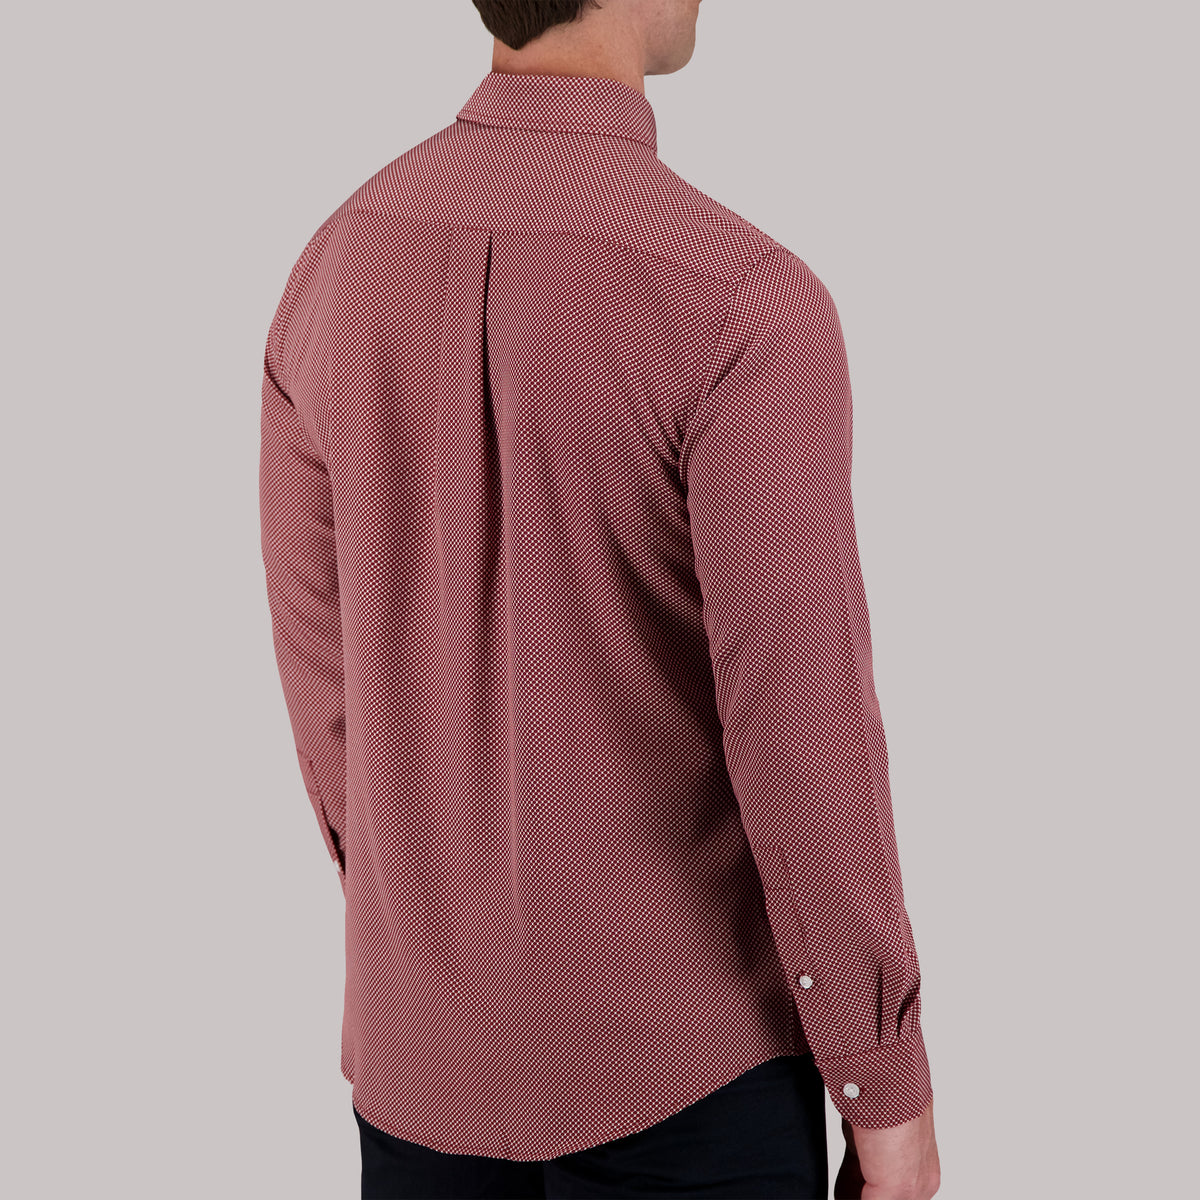 Model Back View of Long Sleeve 4-Way Sport Shirt with Geometric Print in Burgundy